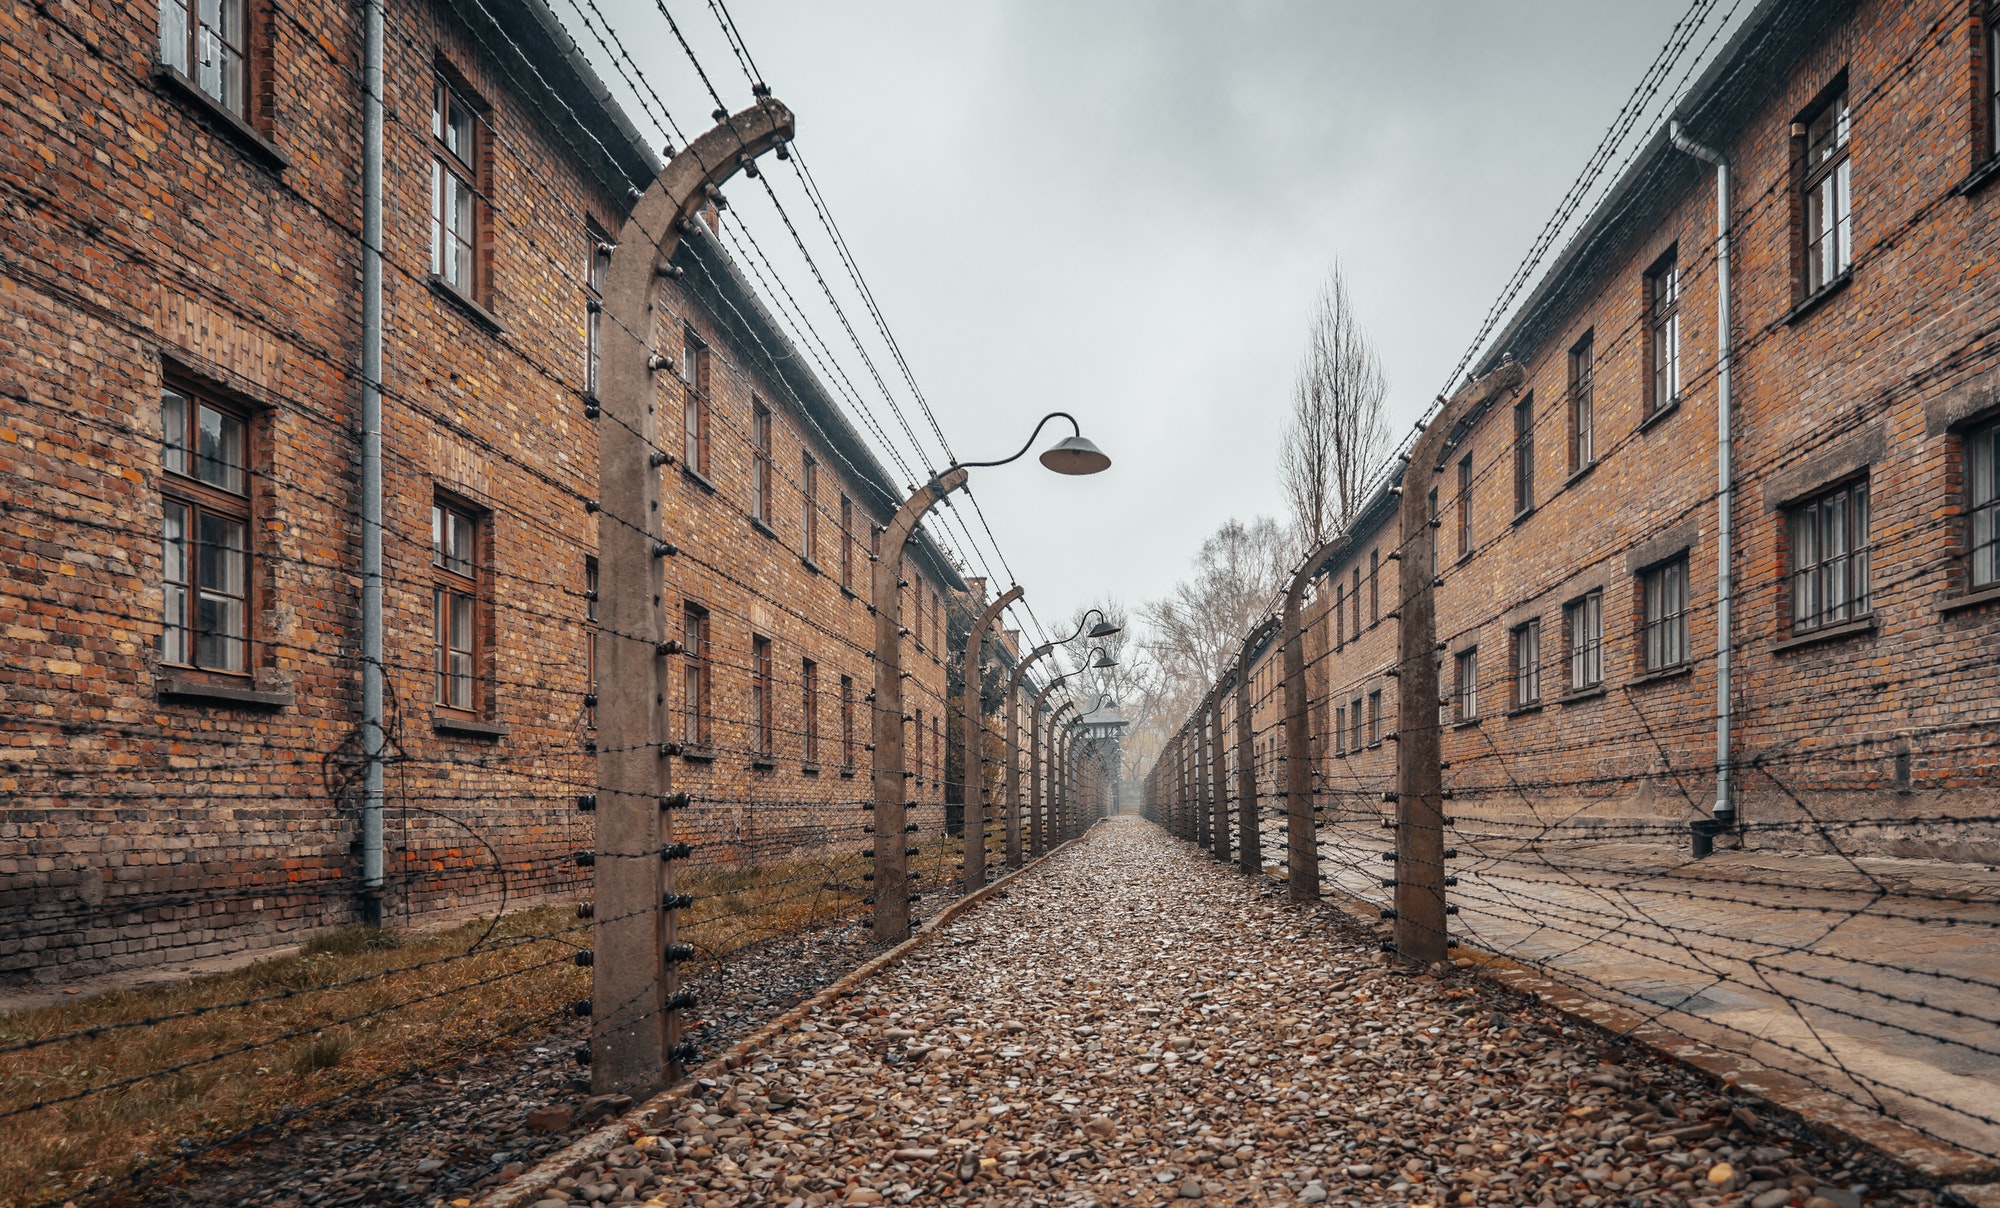 Amazing shot of the Auschwitz concentration camp in Poland